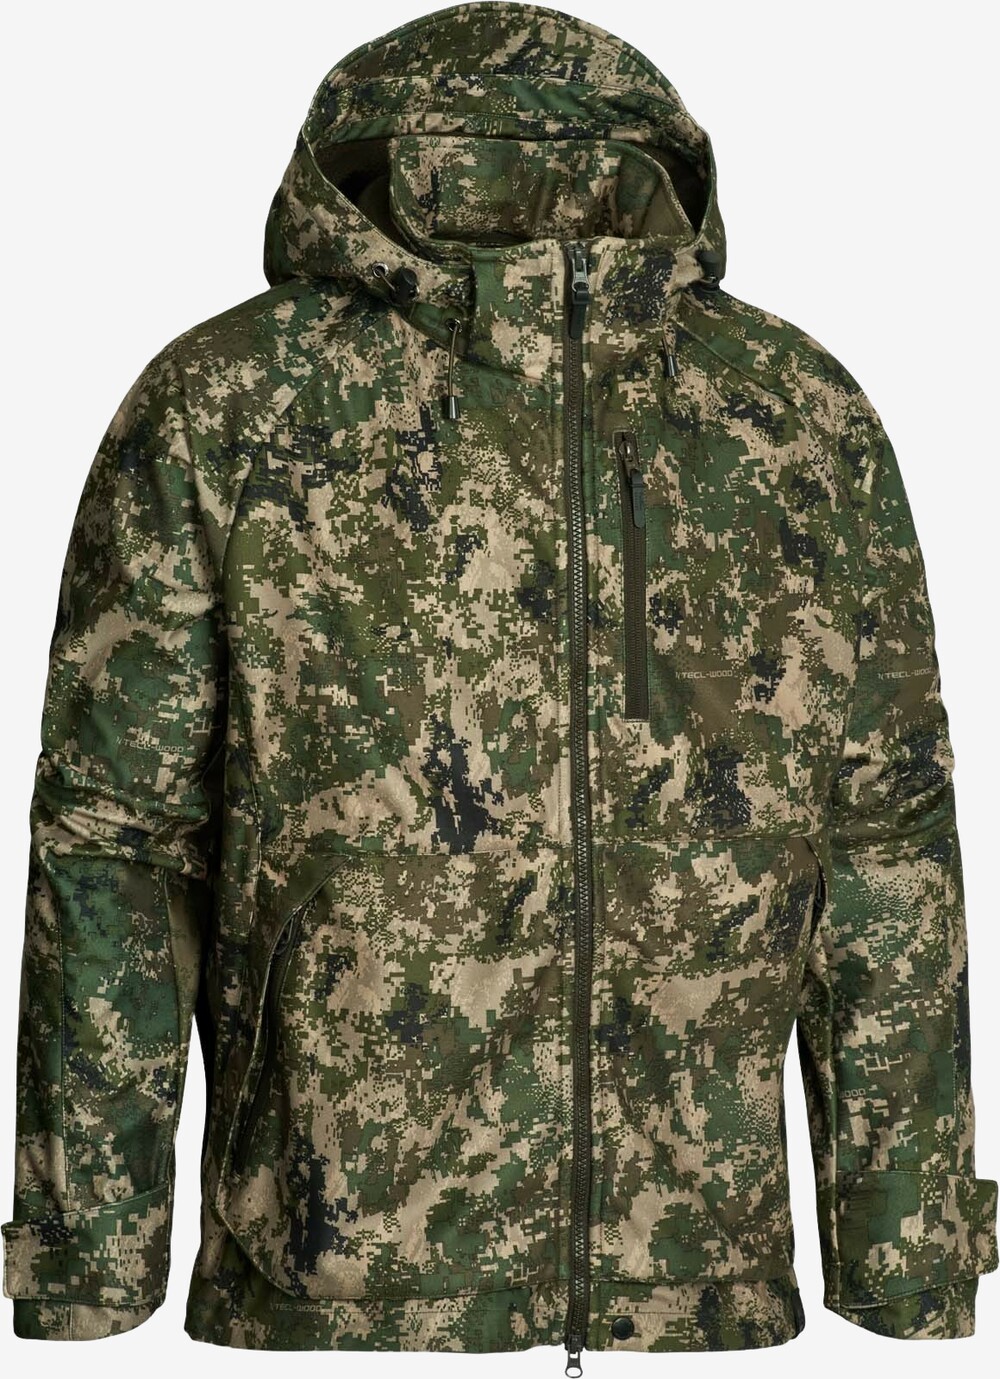 Northern Hunting - Torg Falki opt9 (Camouflage) - 2XL